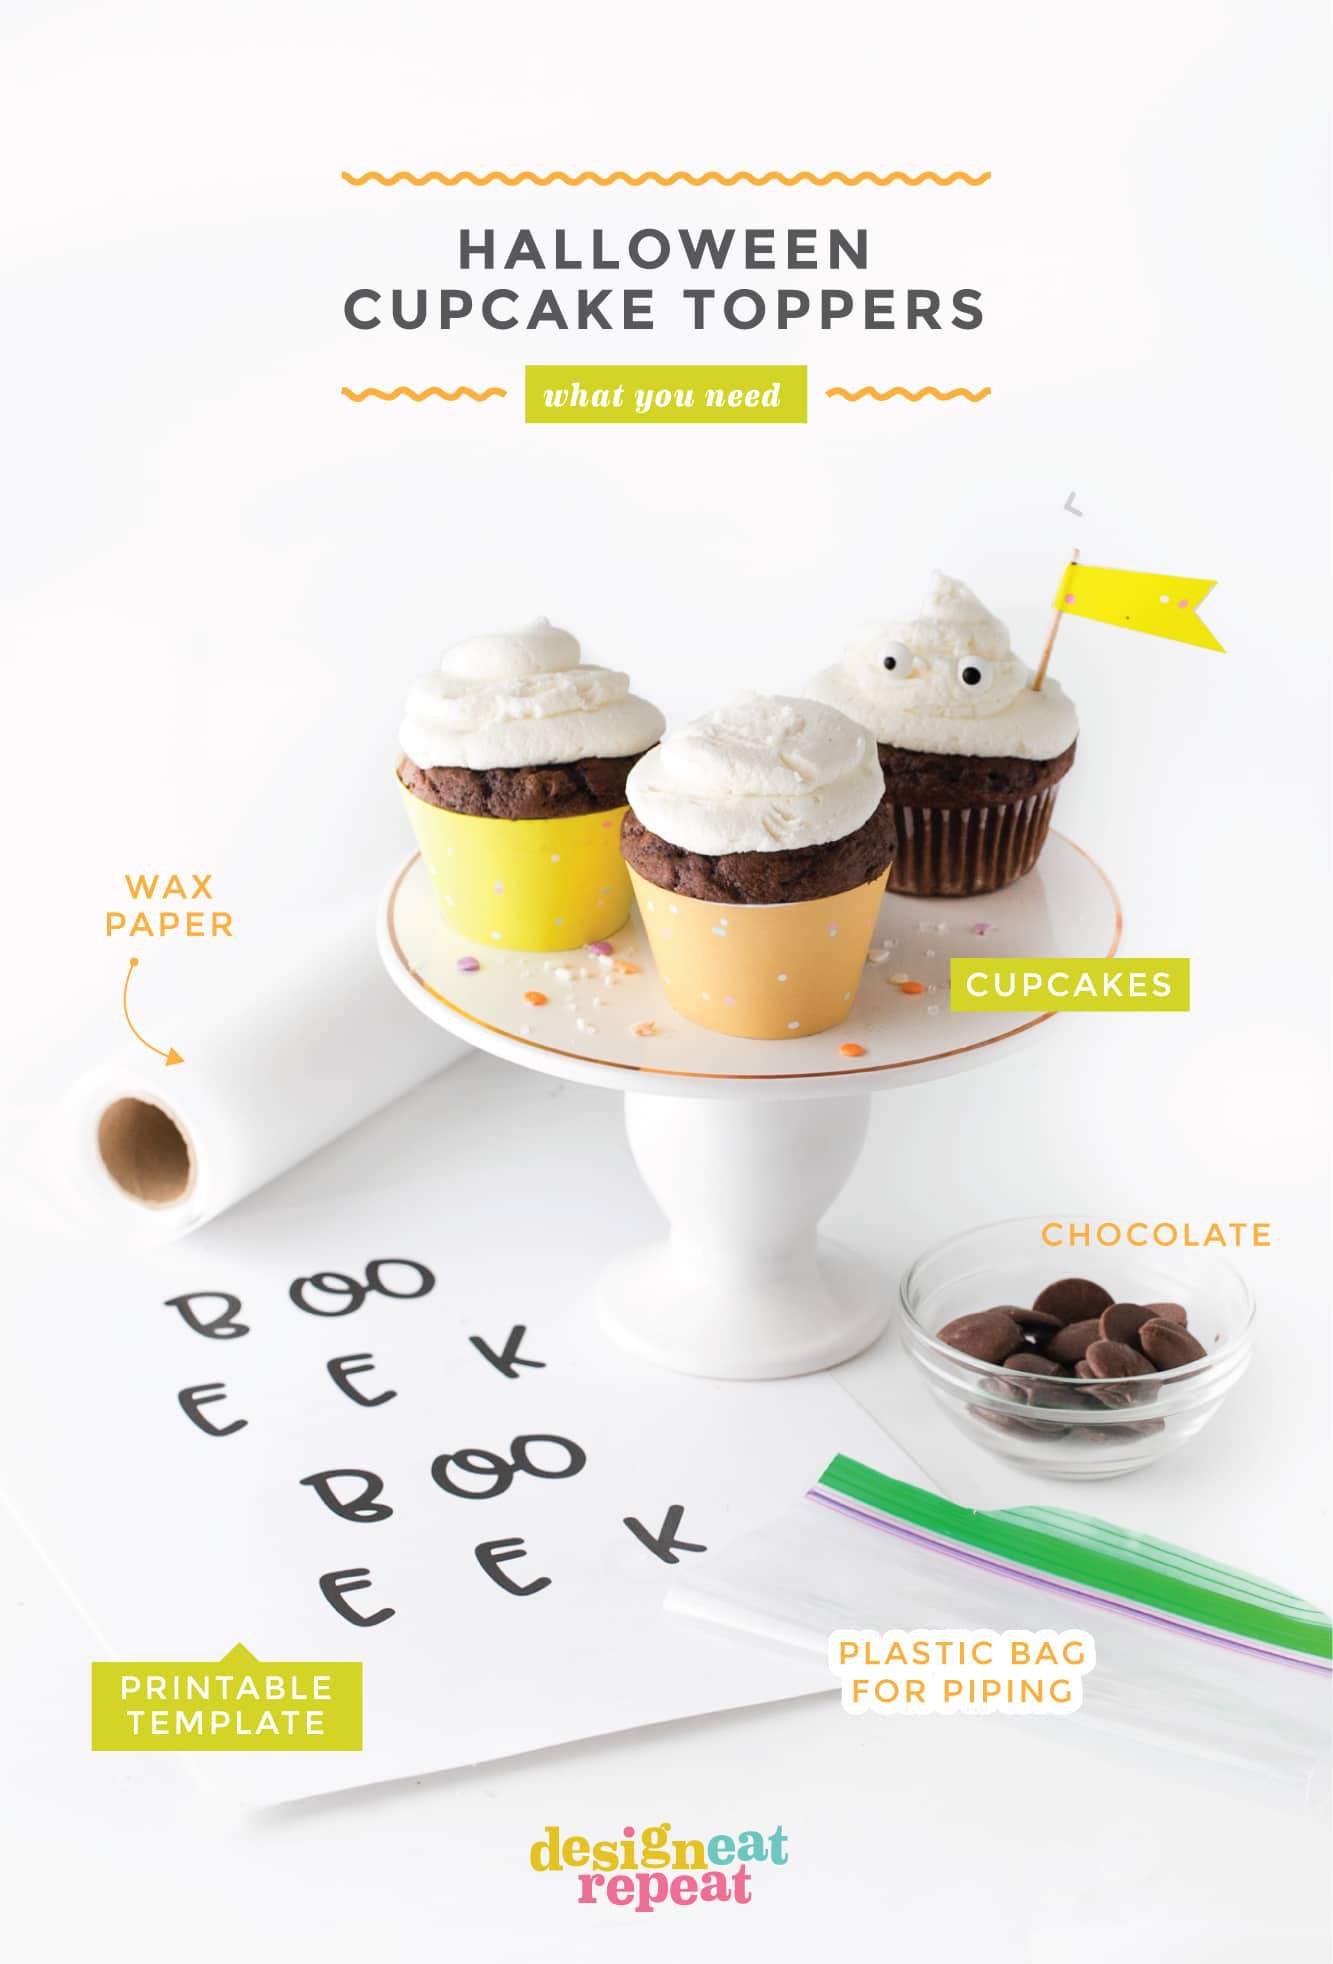 Materials for Edible Halloween Cupcake Toppers. Cupcakes, printable template, wax paper, plastic bag, and chocolate.